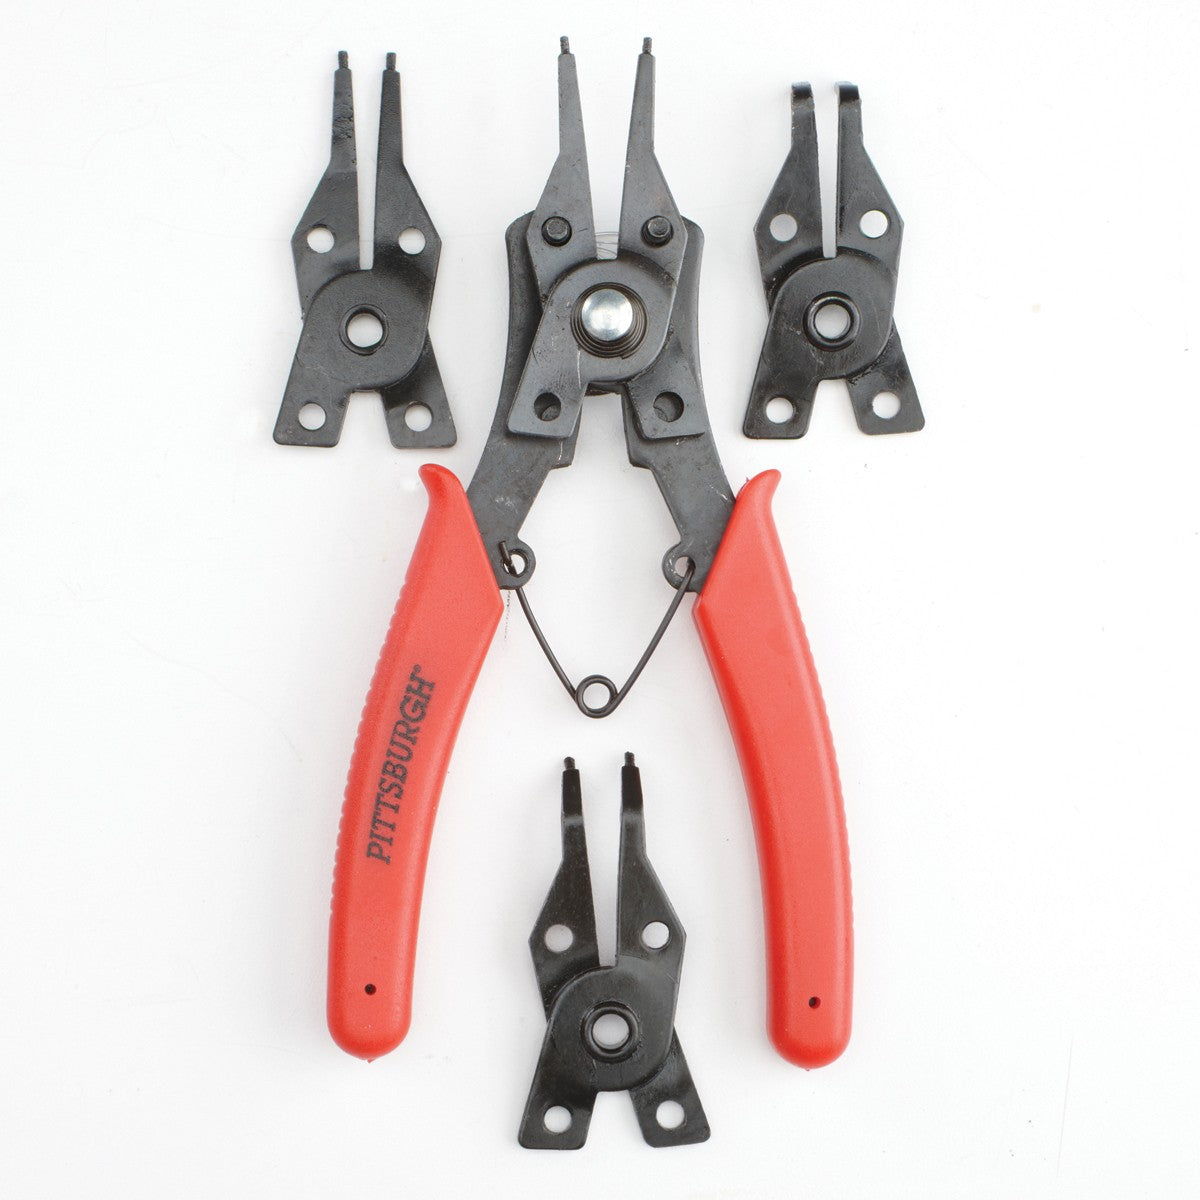 Plier  Snap Ring Plier for clip-on blinders